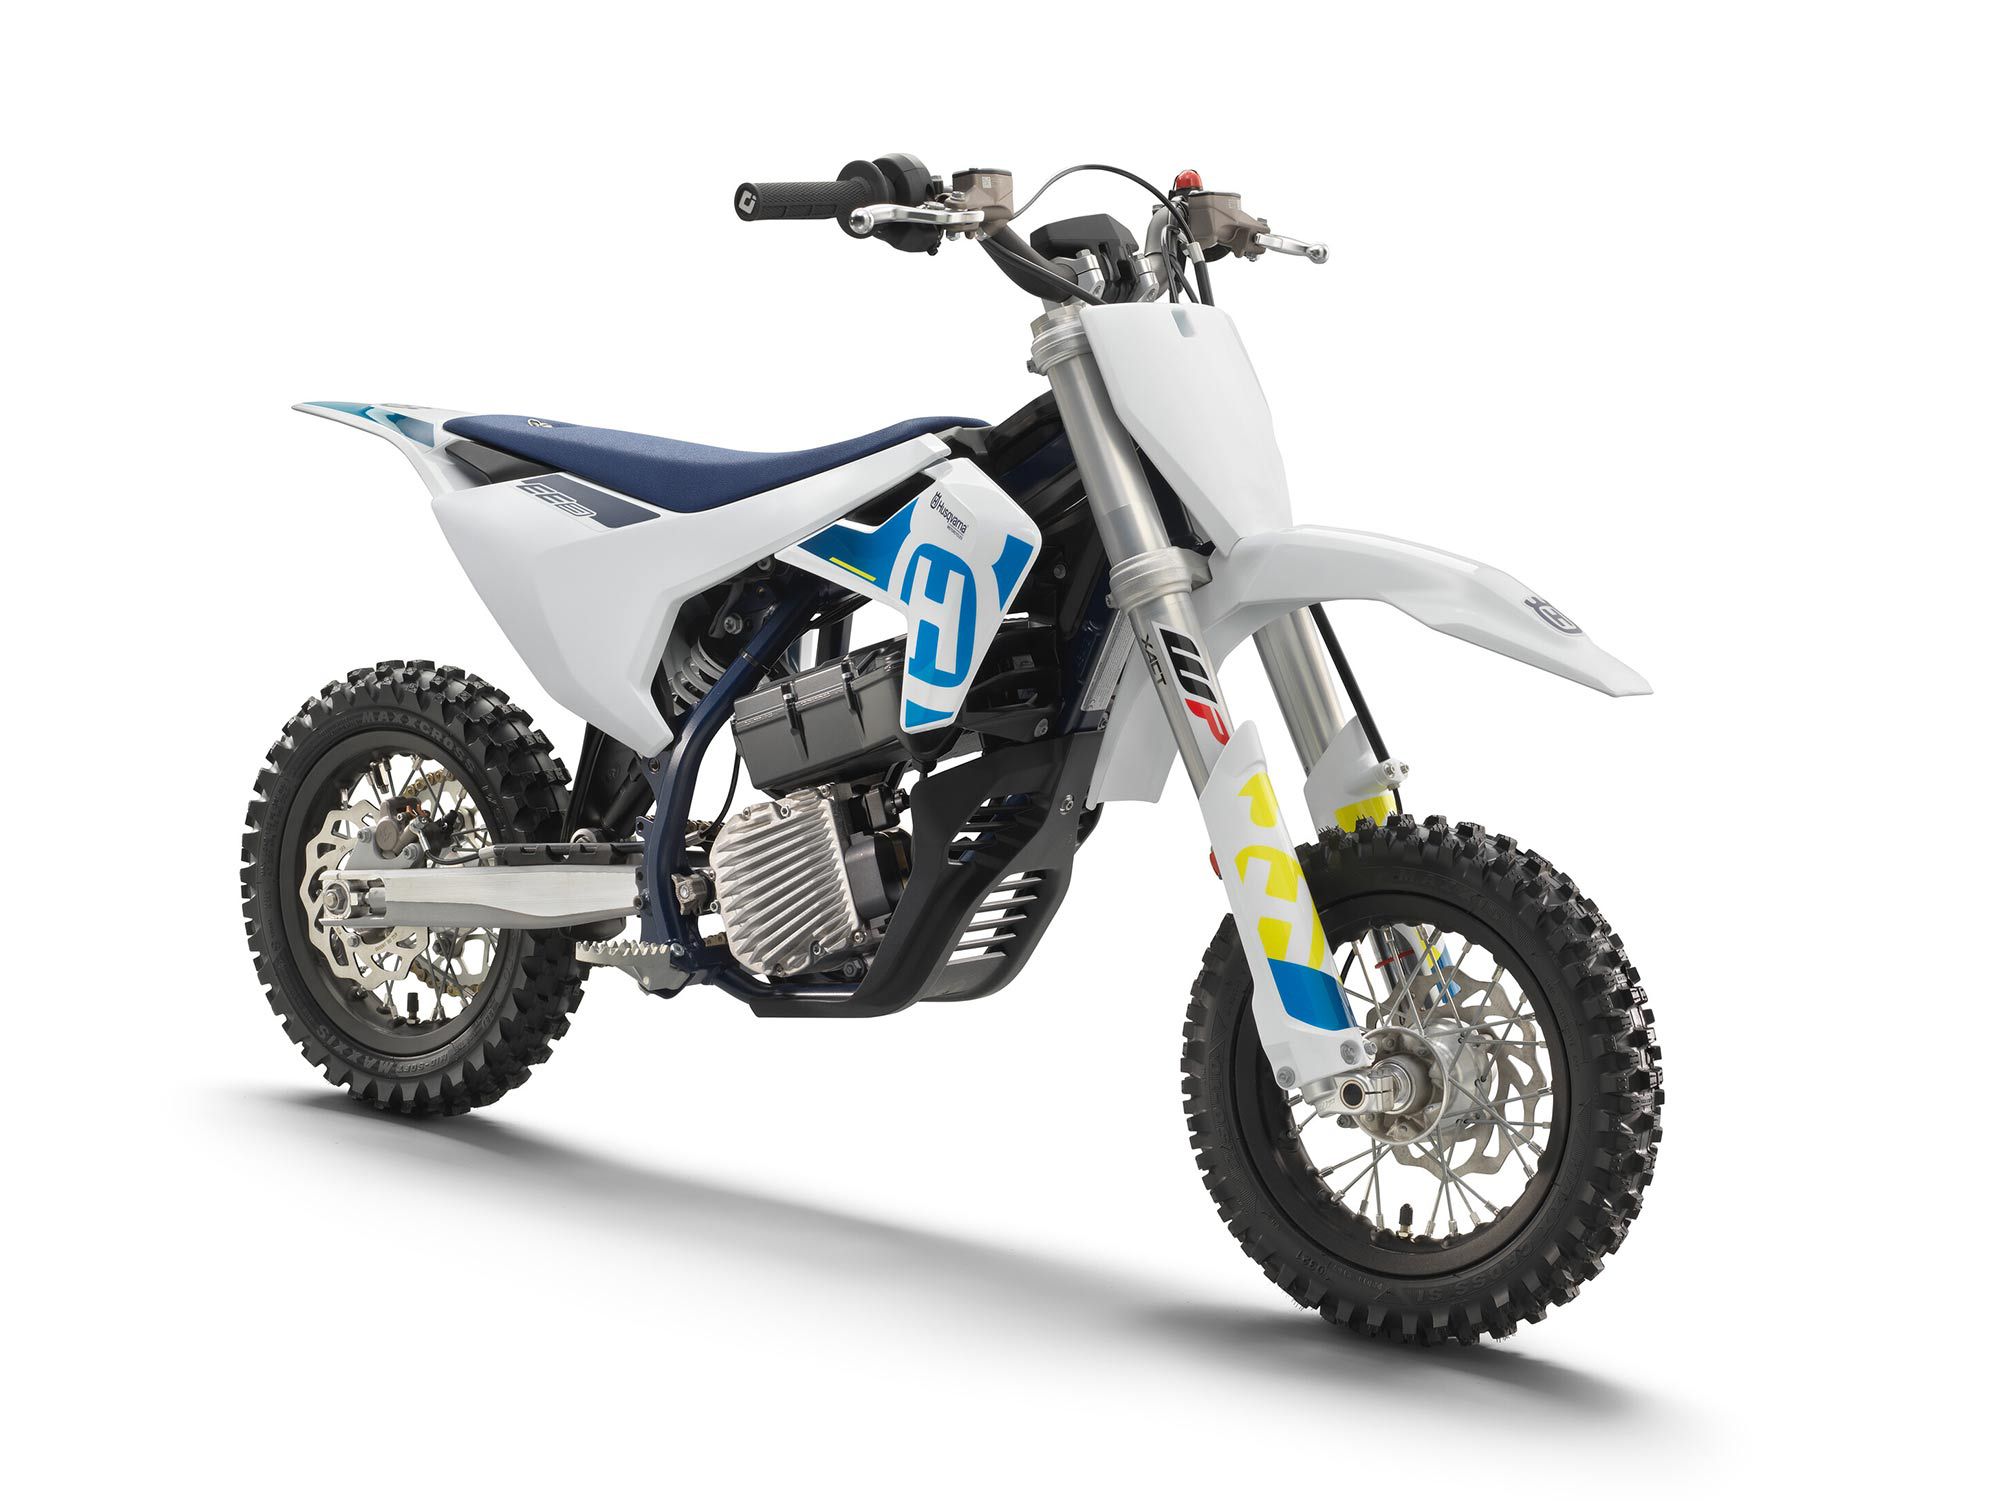 The EE 3 will be great for young riders just starting out.